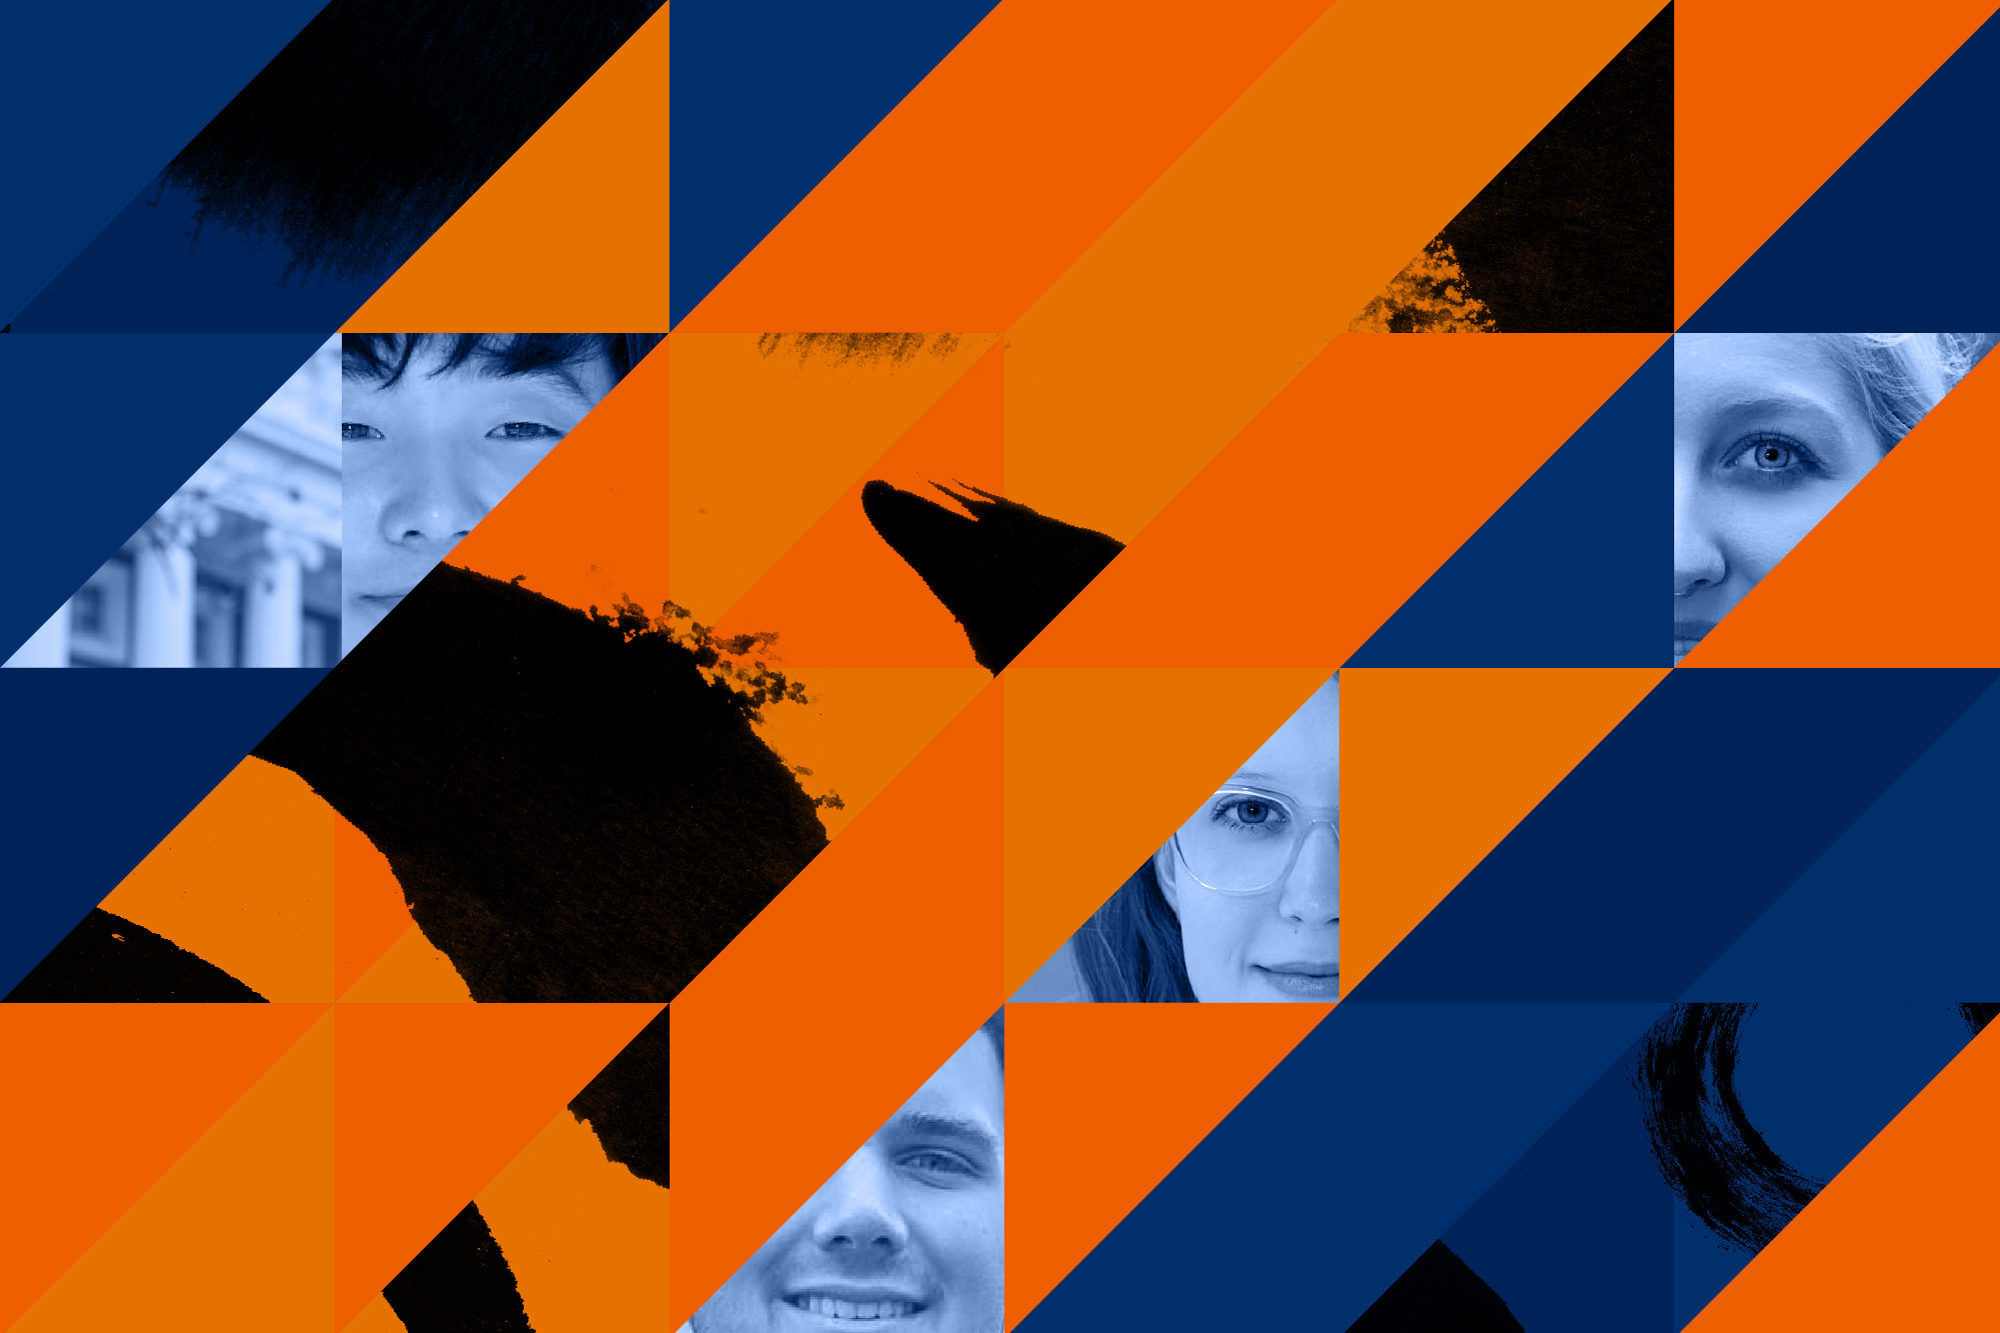 Collage of blue and orange shapes and peoples faces